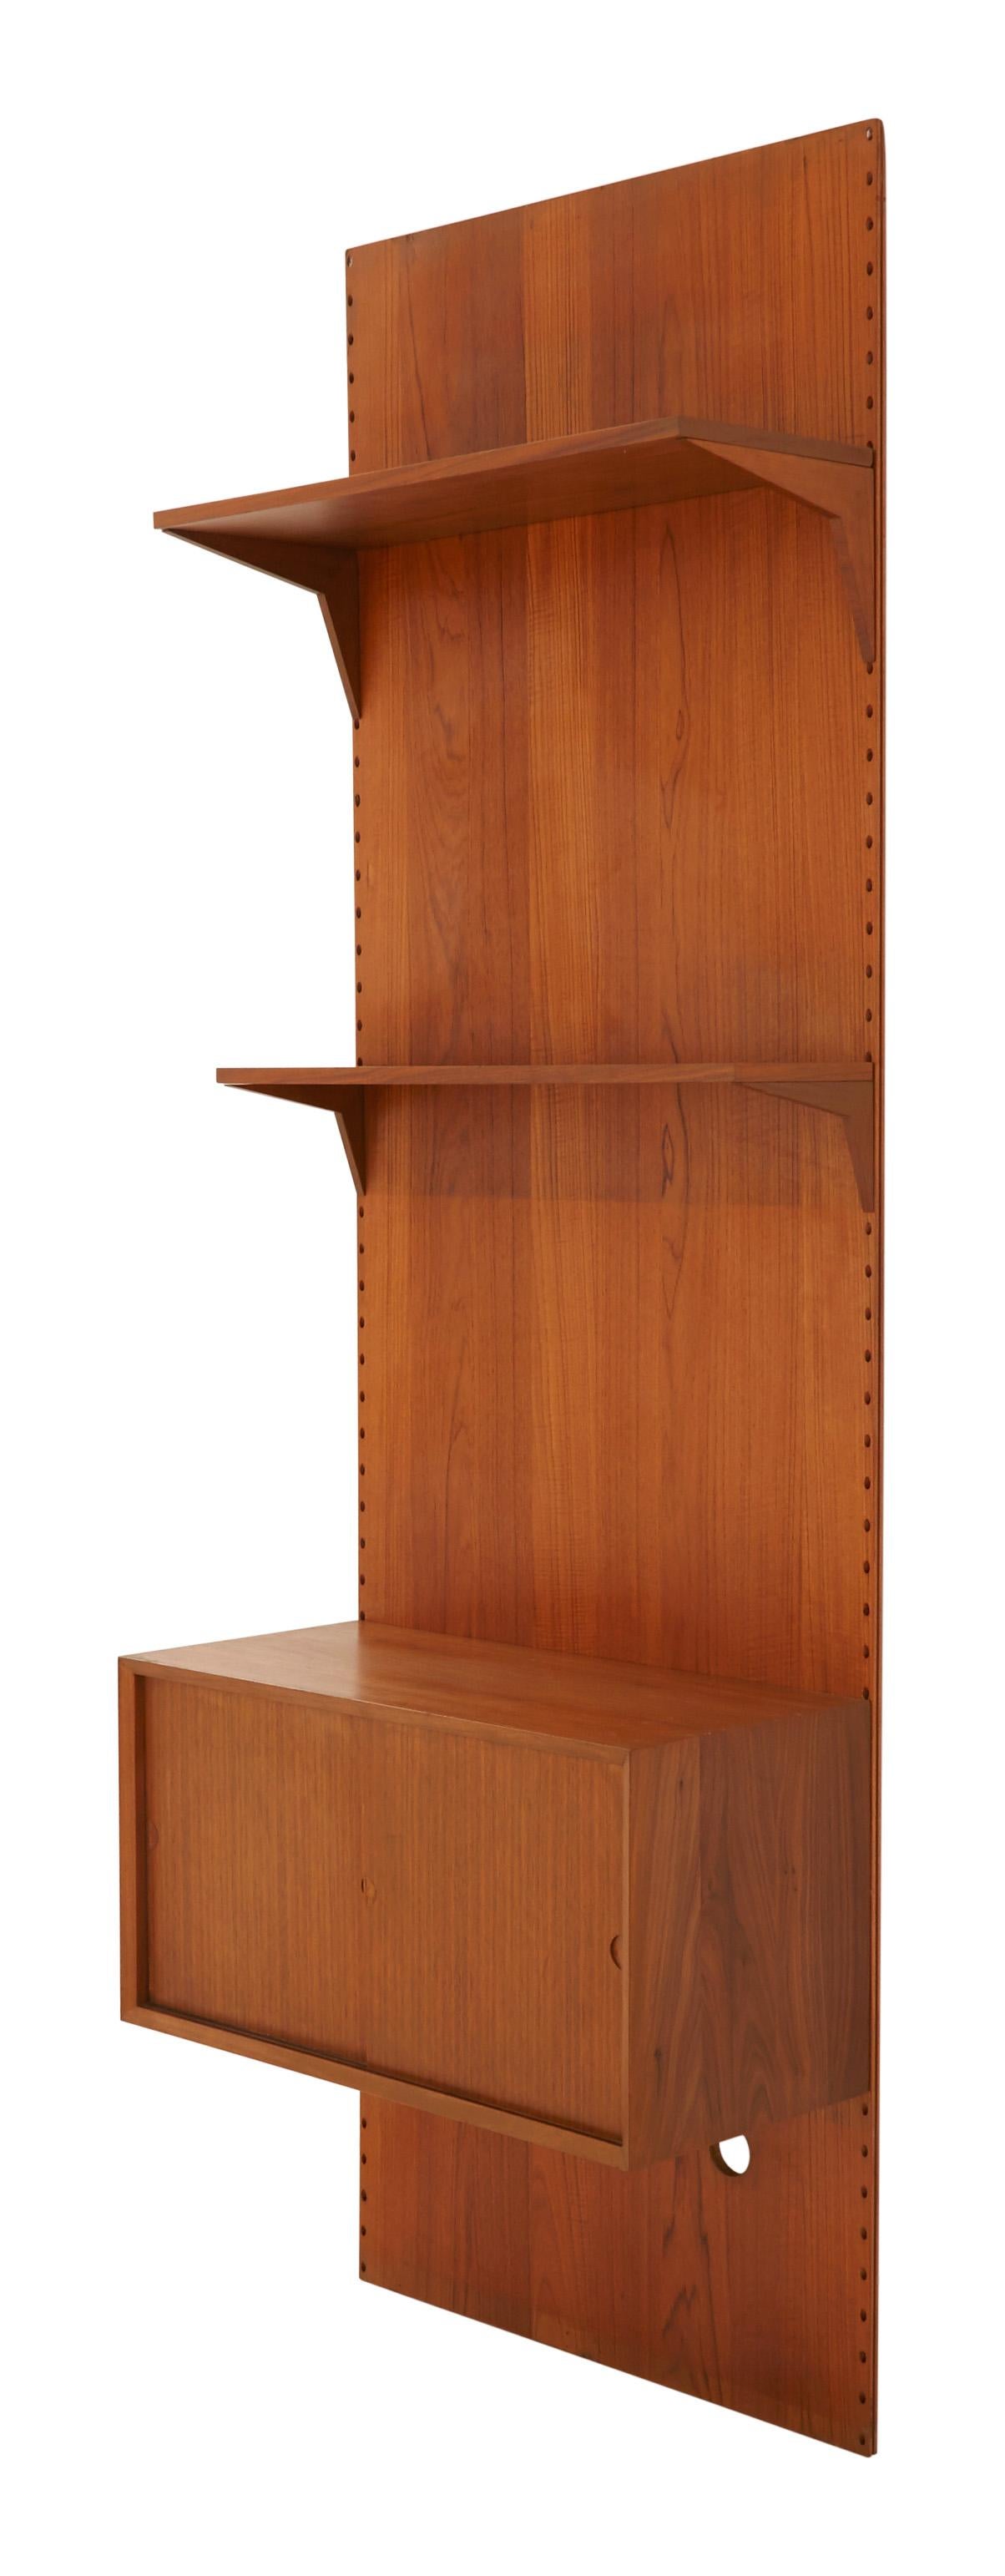 •Mid-20th century
•Teak wood
•Mountable
•Designed by Poul Cadovius for Cado
•France
•Other coordinating pieces available
•Measures: 31.5” W x 16